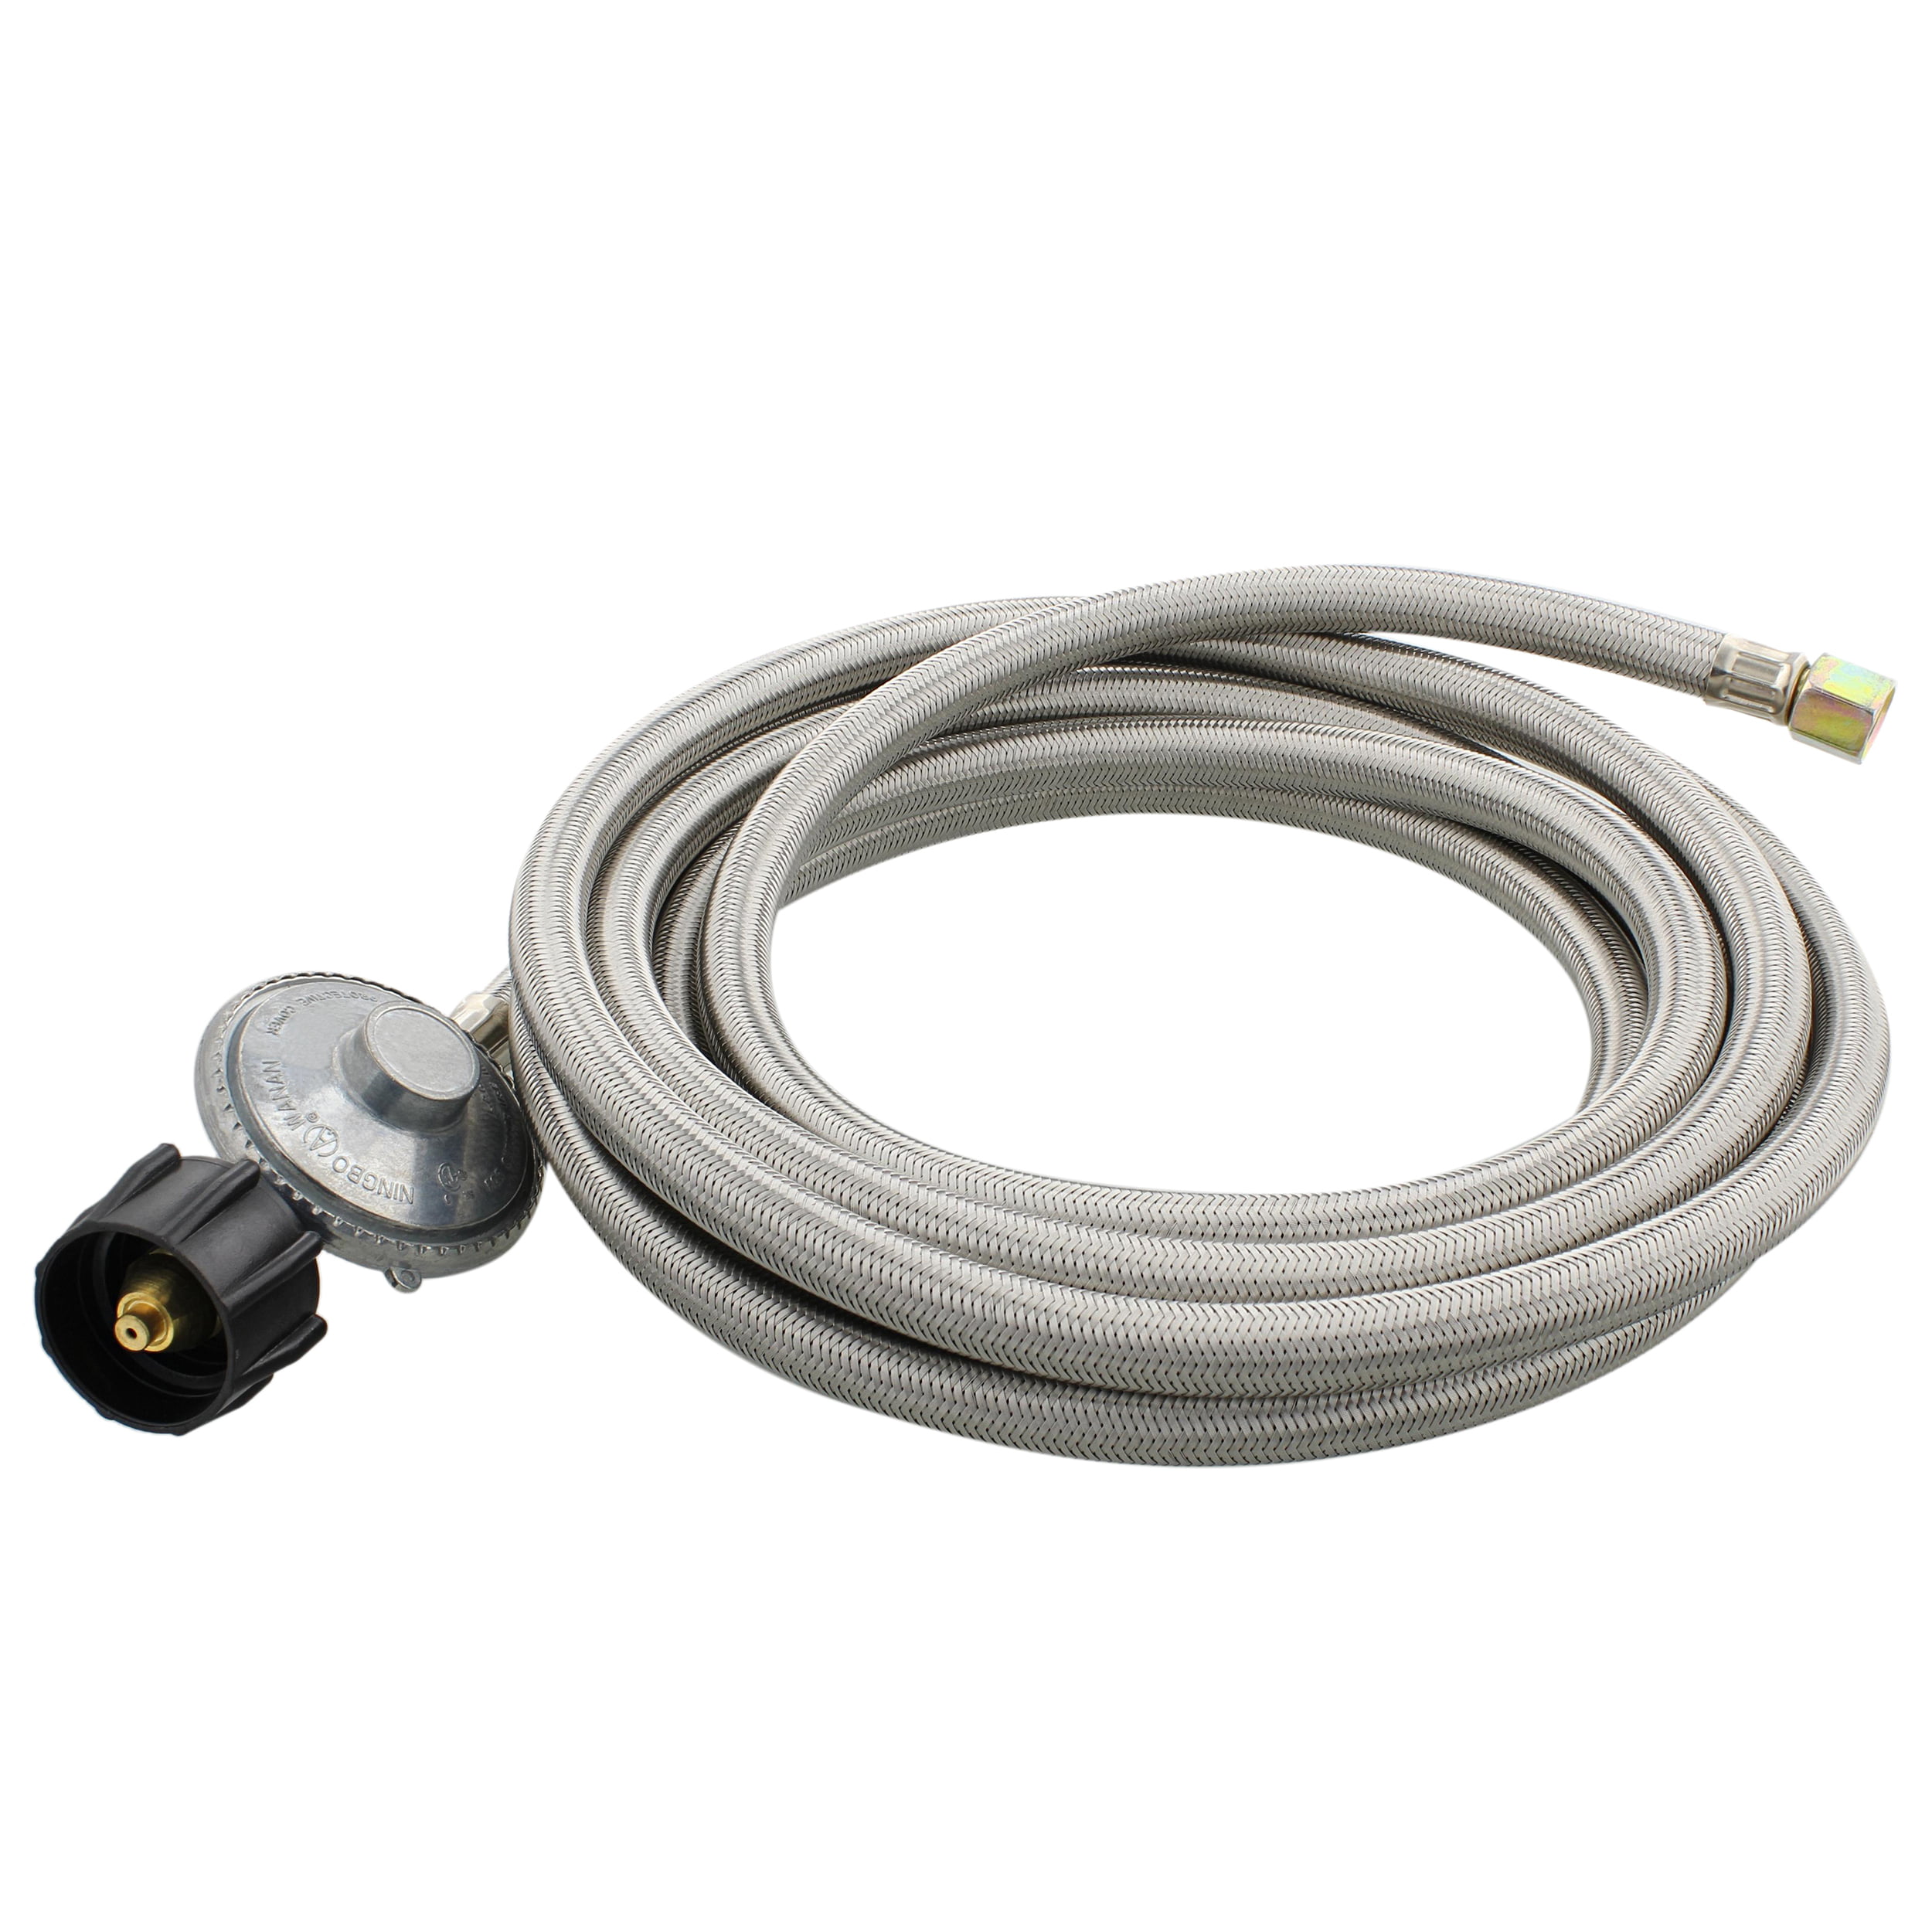 5 ft QCC1 Stainless Steel Braided Propane Adapter Hose with Regulator 